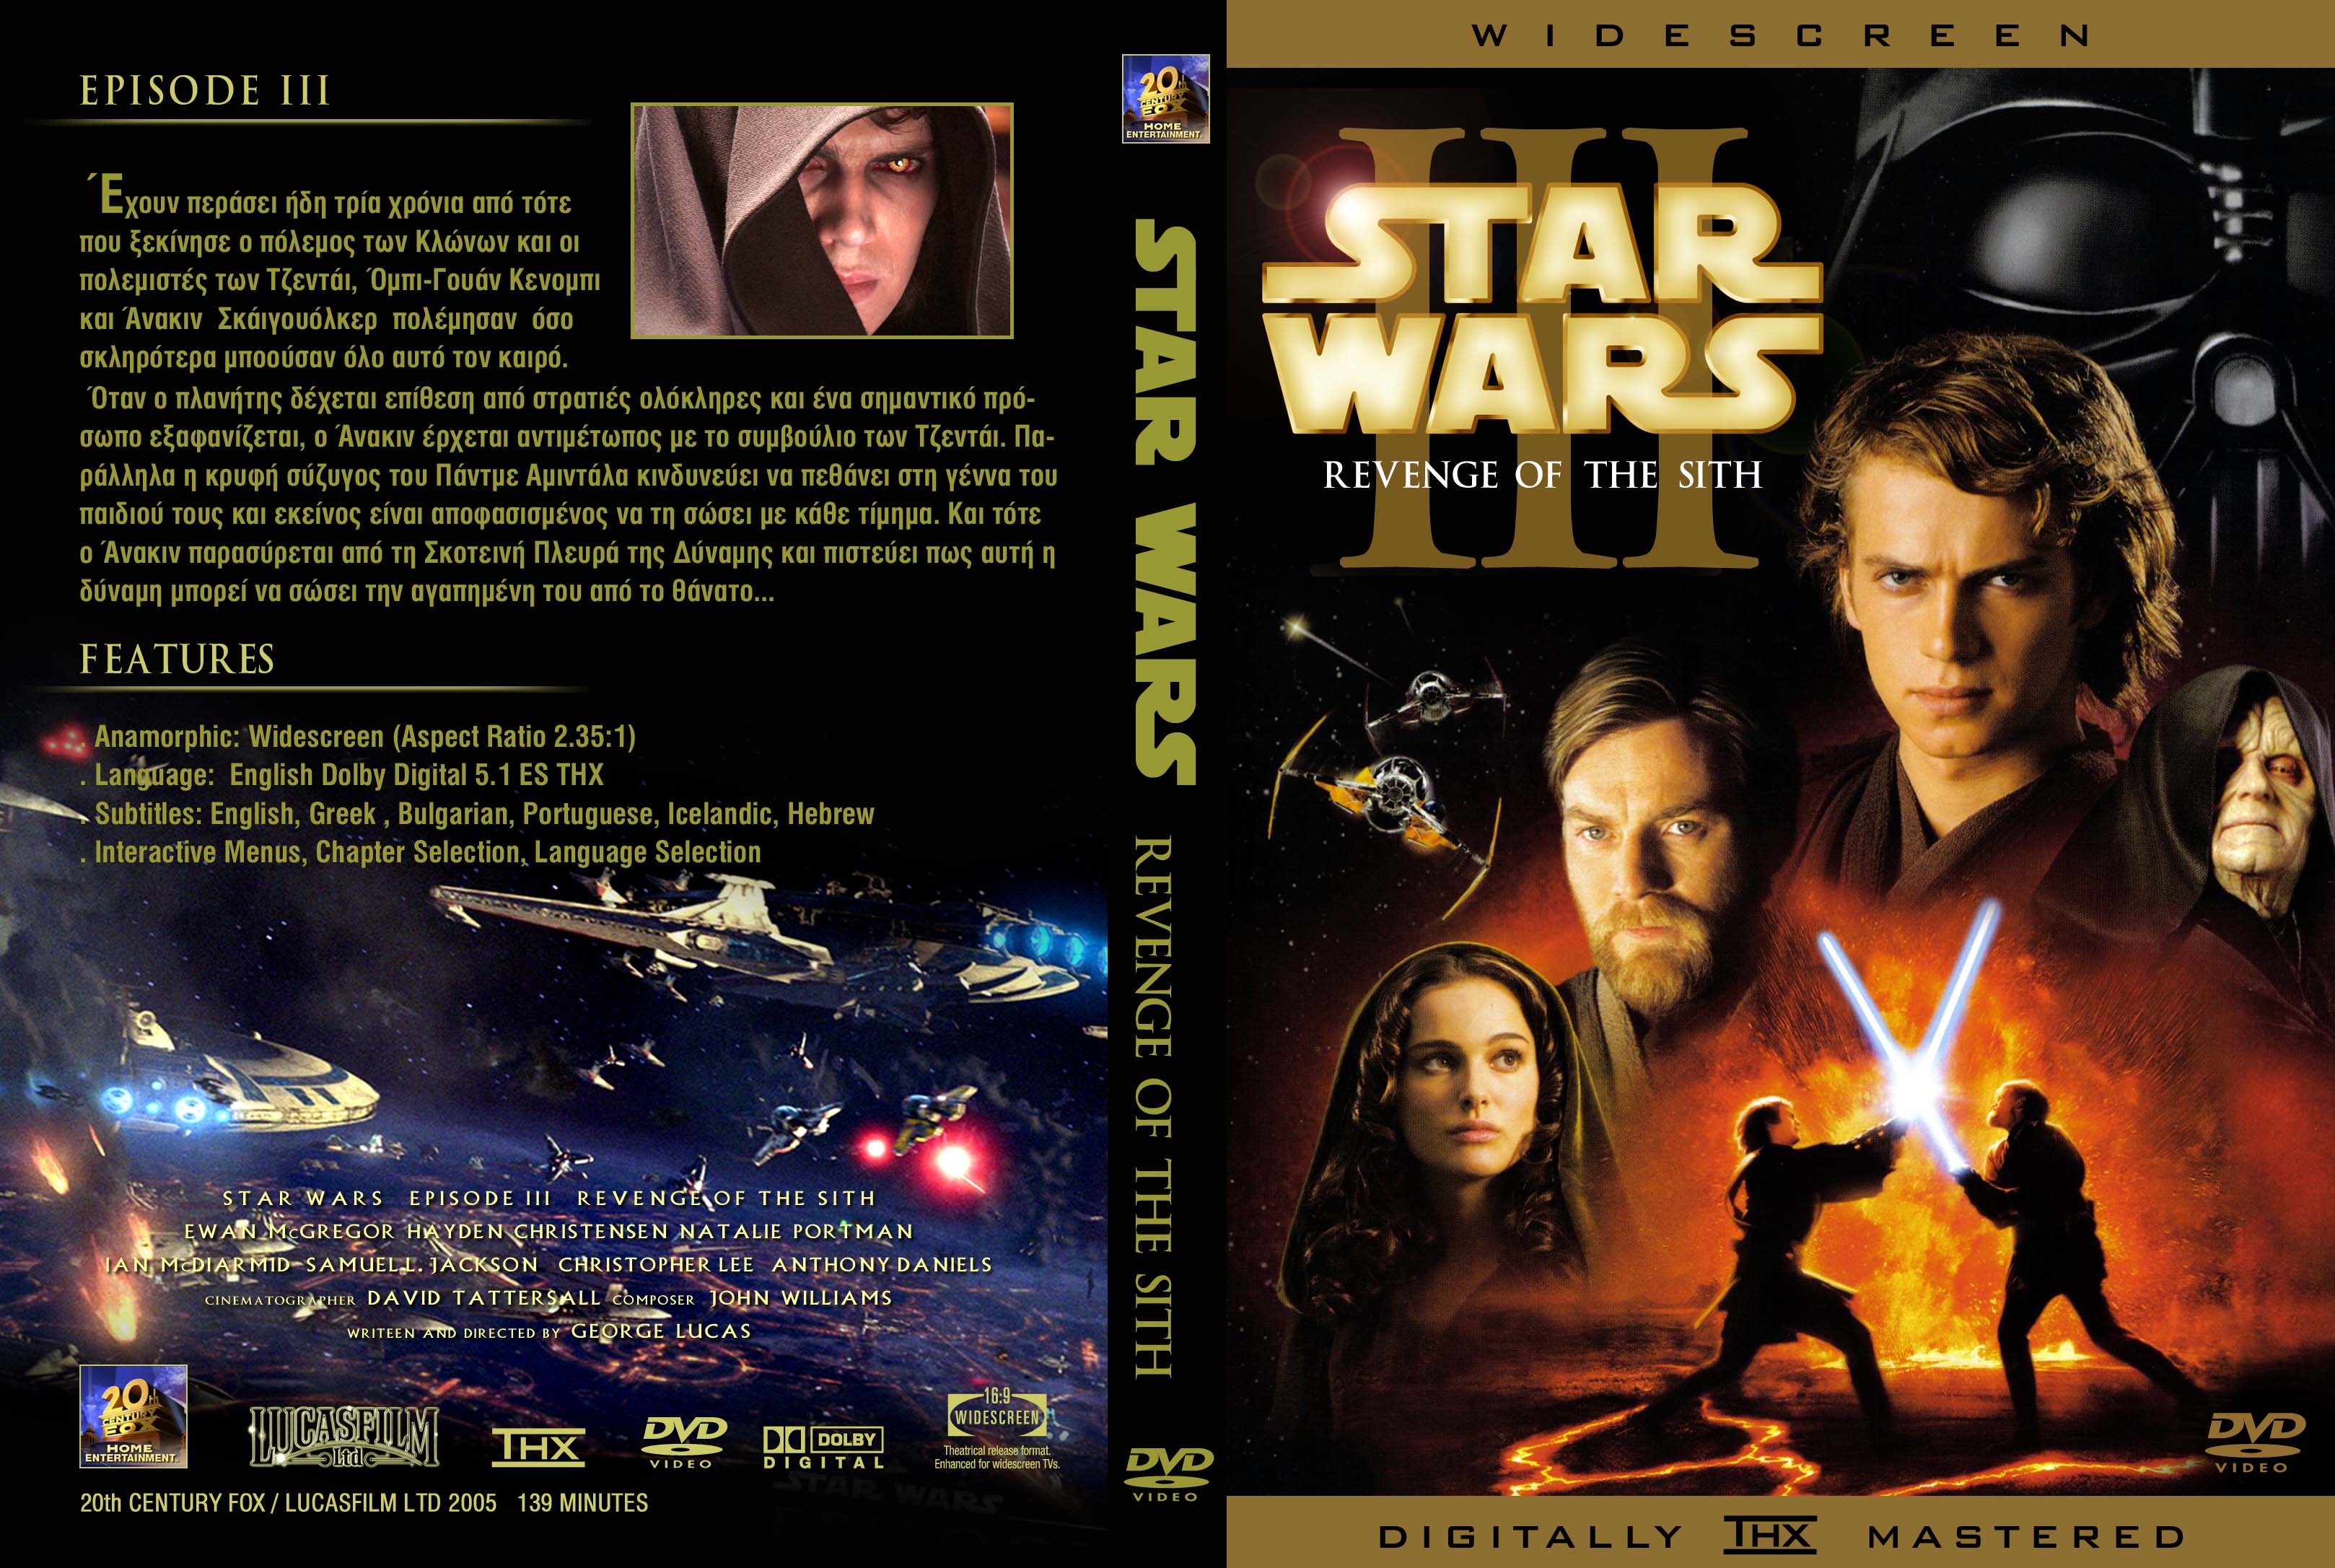 last 30 minutes of revenge of the sith torrent